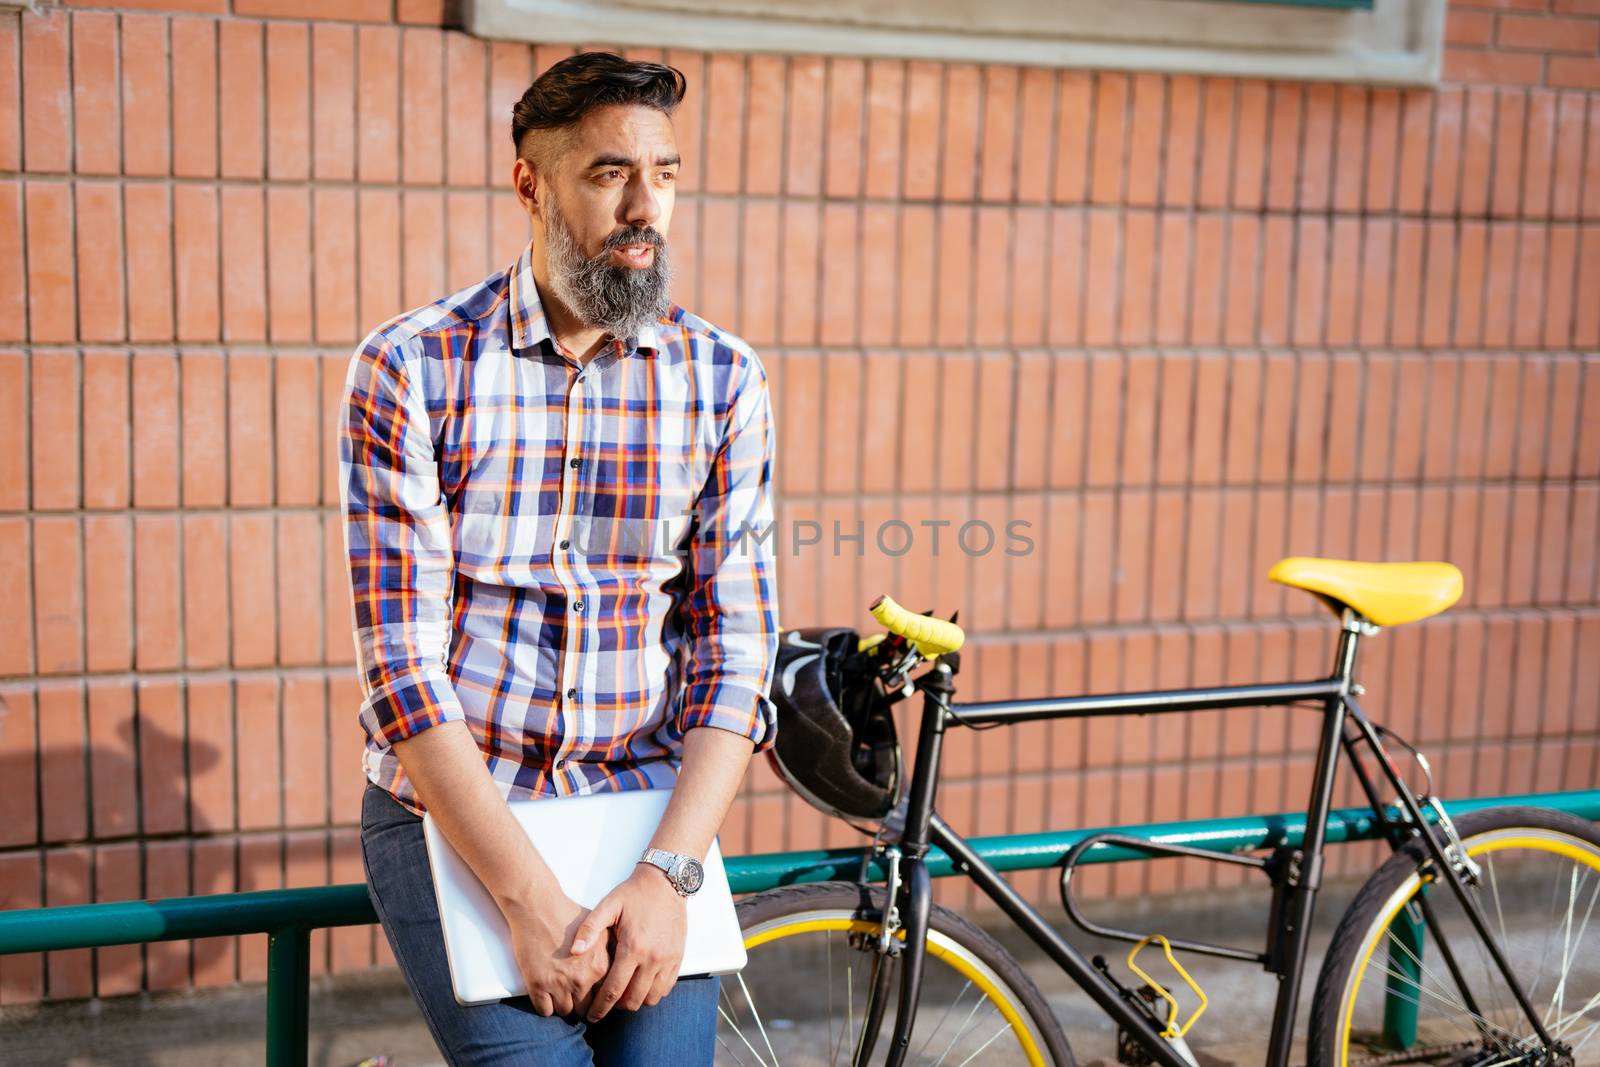 Casual businessman having a break. He is standing in front of the building next to bike and holding laptop.